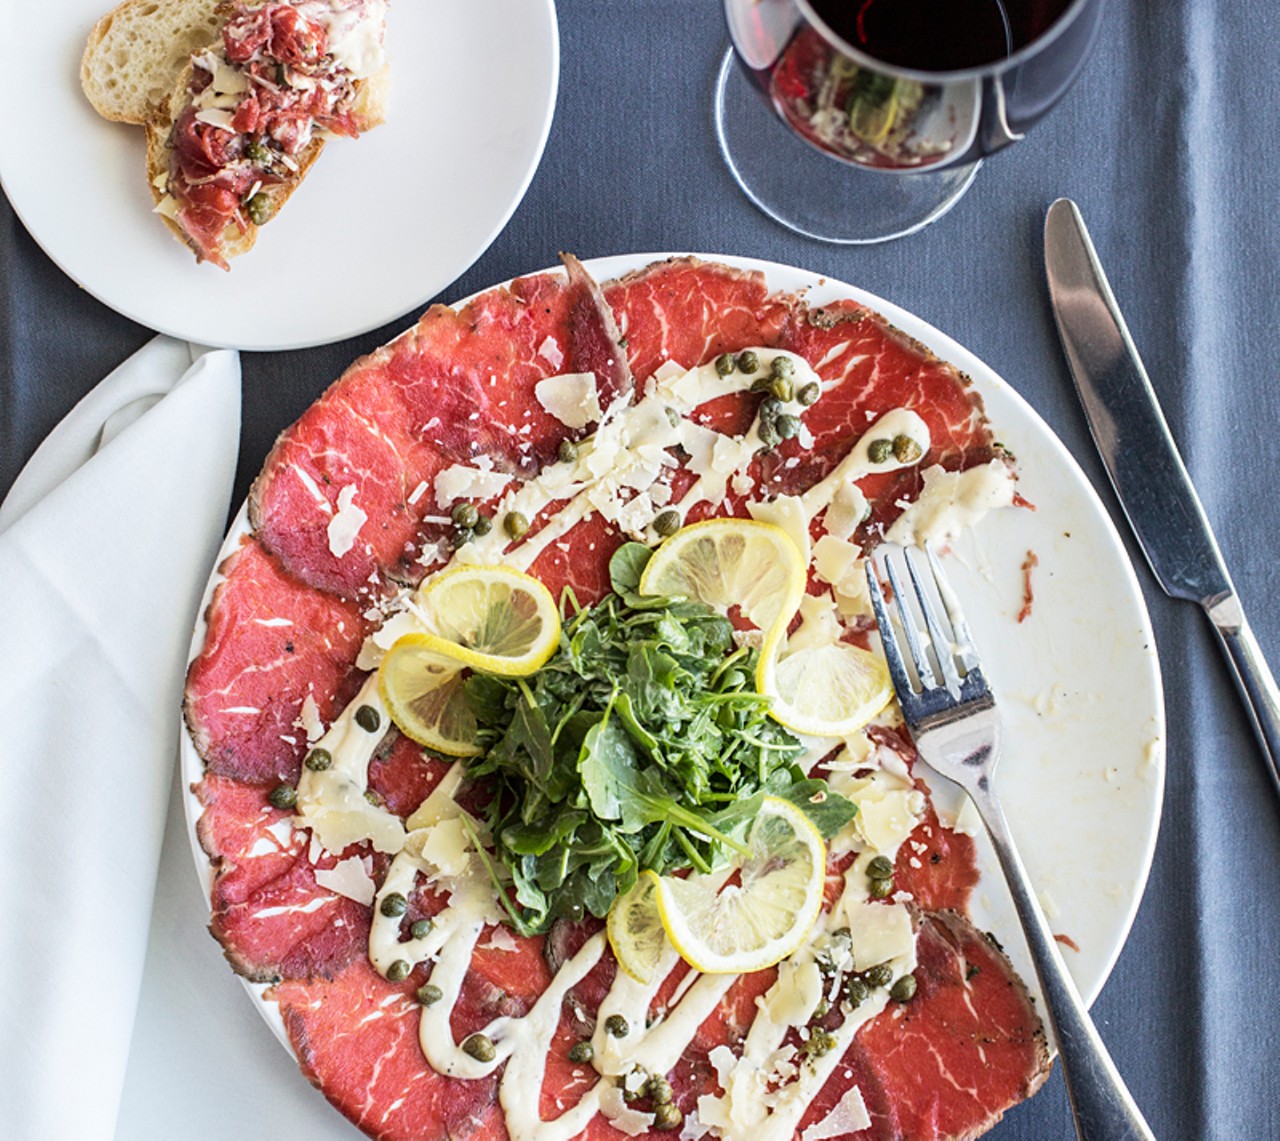 Peppered beef carpaccio: thinly sliced beef fillet, mustard dressing, arugula, shaved parmesan, capers and lemon.